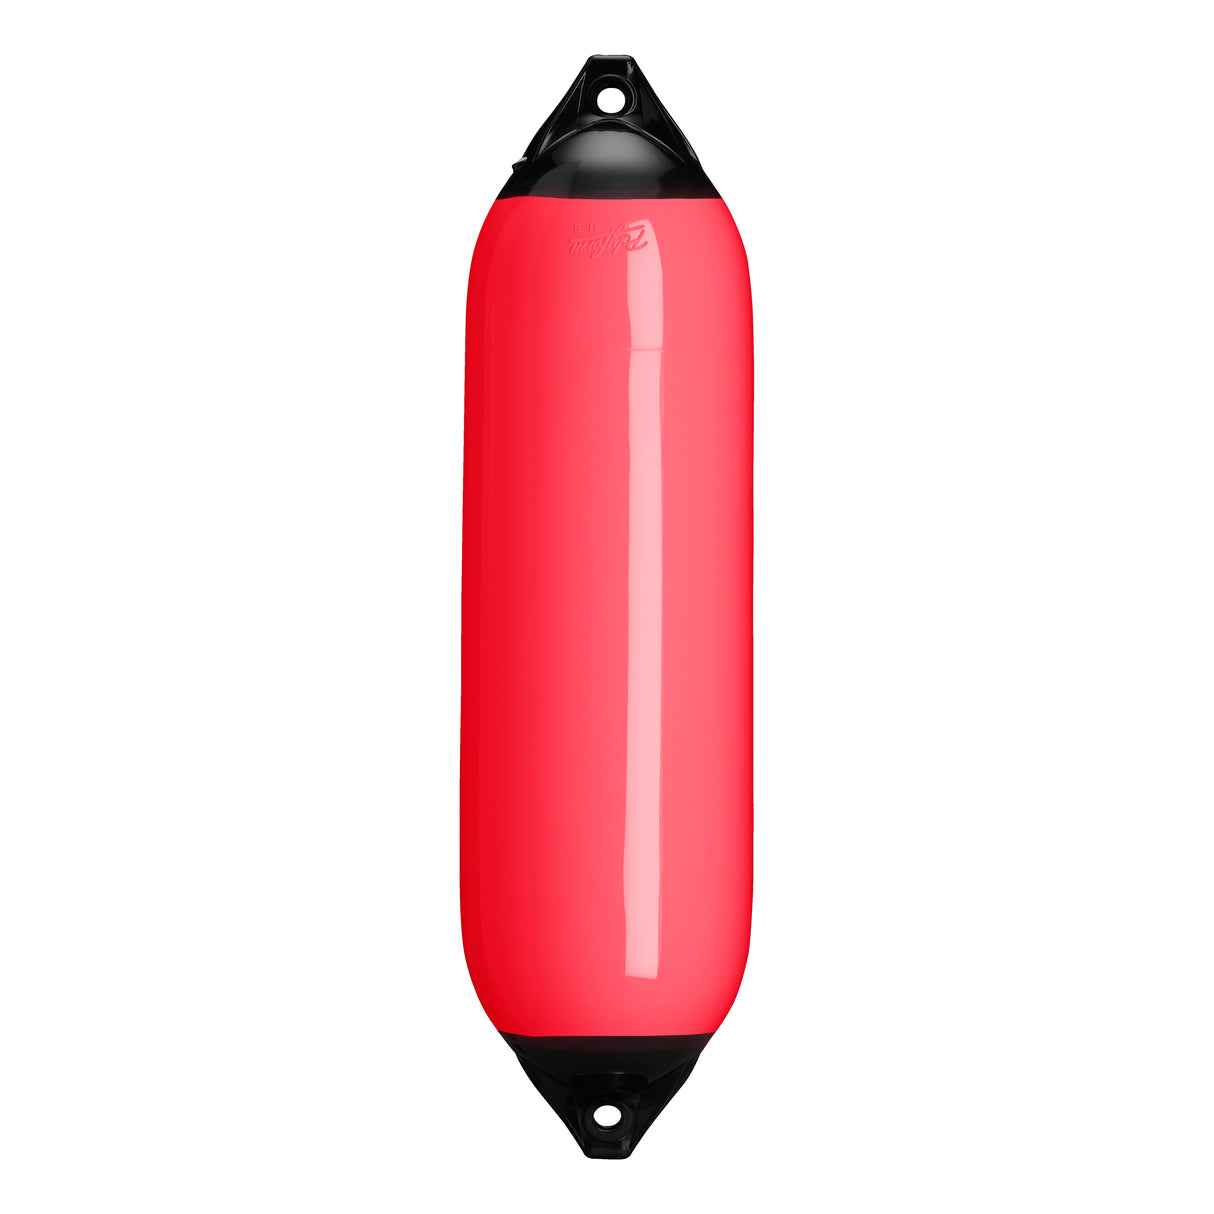 Red boat fender with Black-Top, Polyform F-6